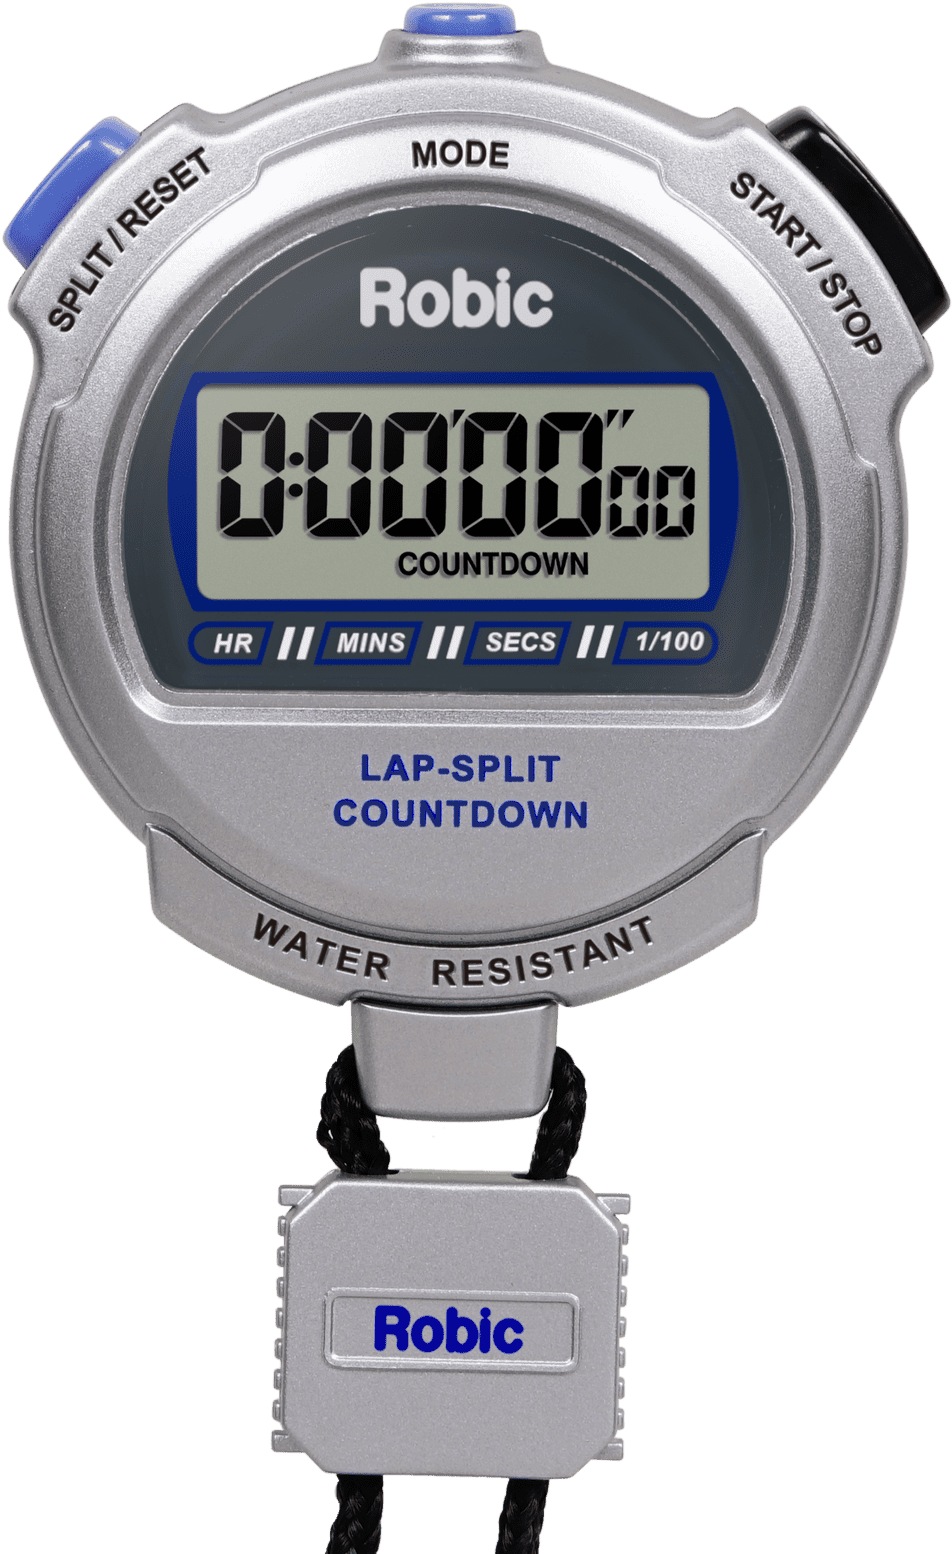 Robic Silver 2.0 Twin Stopwatch with Countdown Timer - Silver - HIT a Double